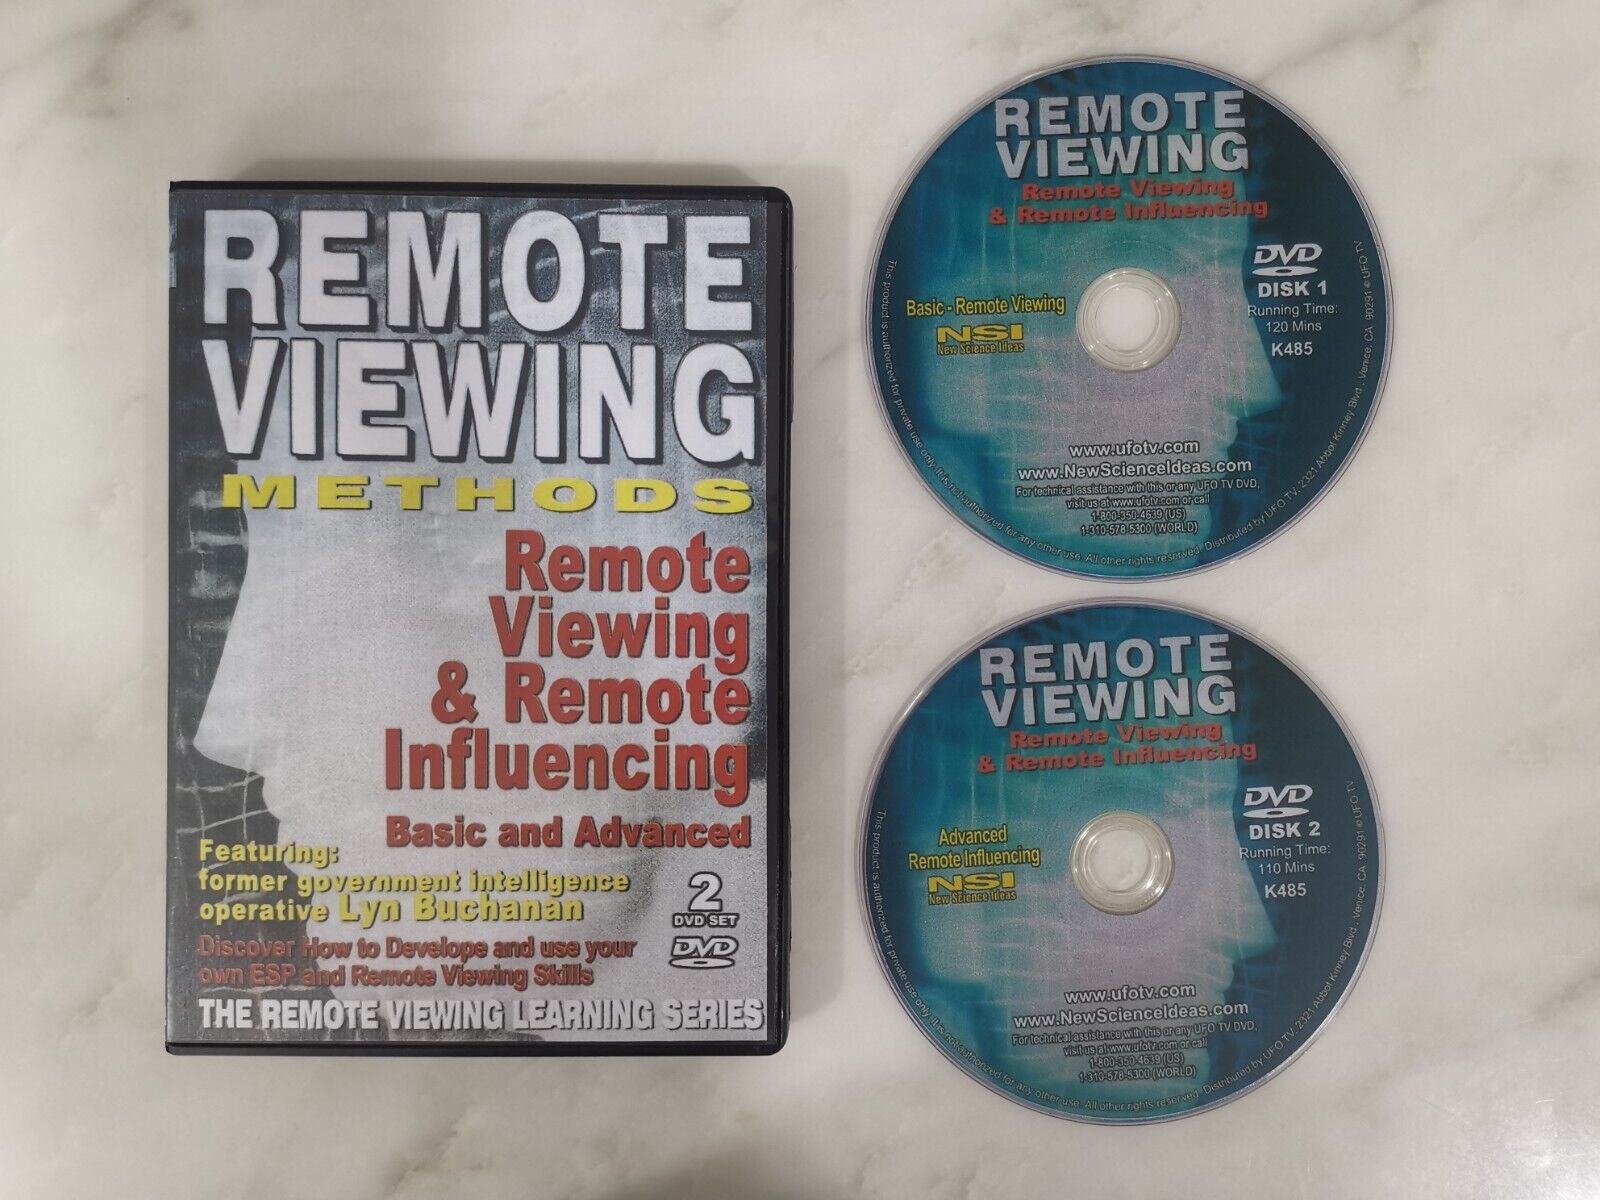 Remote Viewing Methods - Remote Viewing And Remote Influencing - Lyn Buchanan